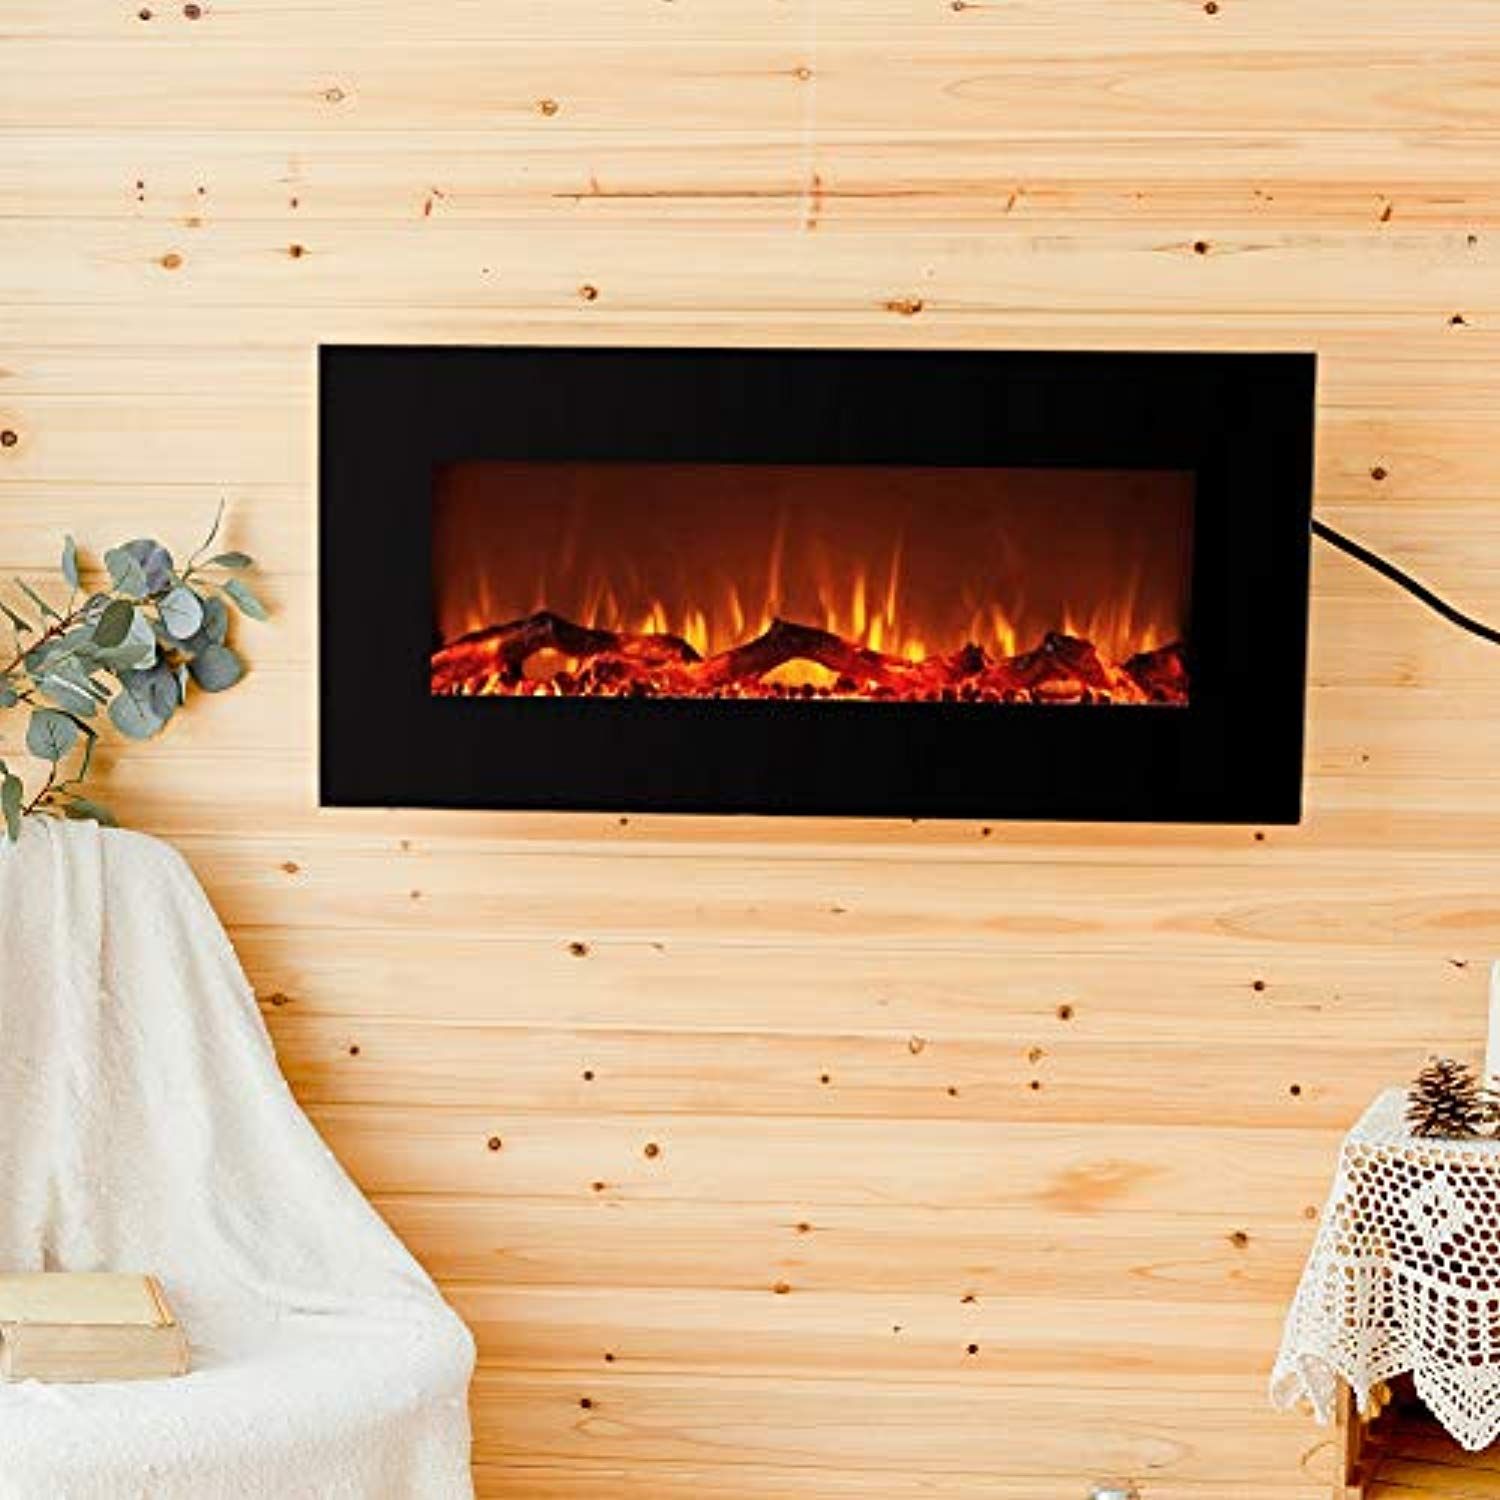 52 Inch High Electric Fireplace Beautiful Flame Homedcor Home D©cor In 2019